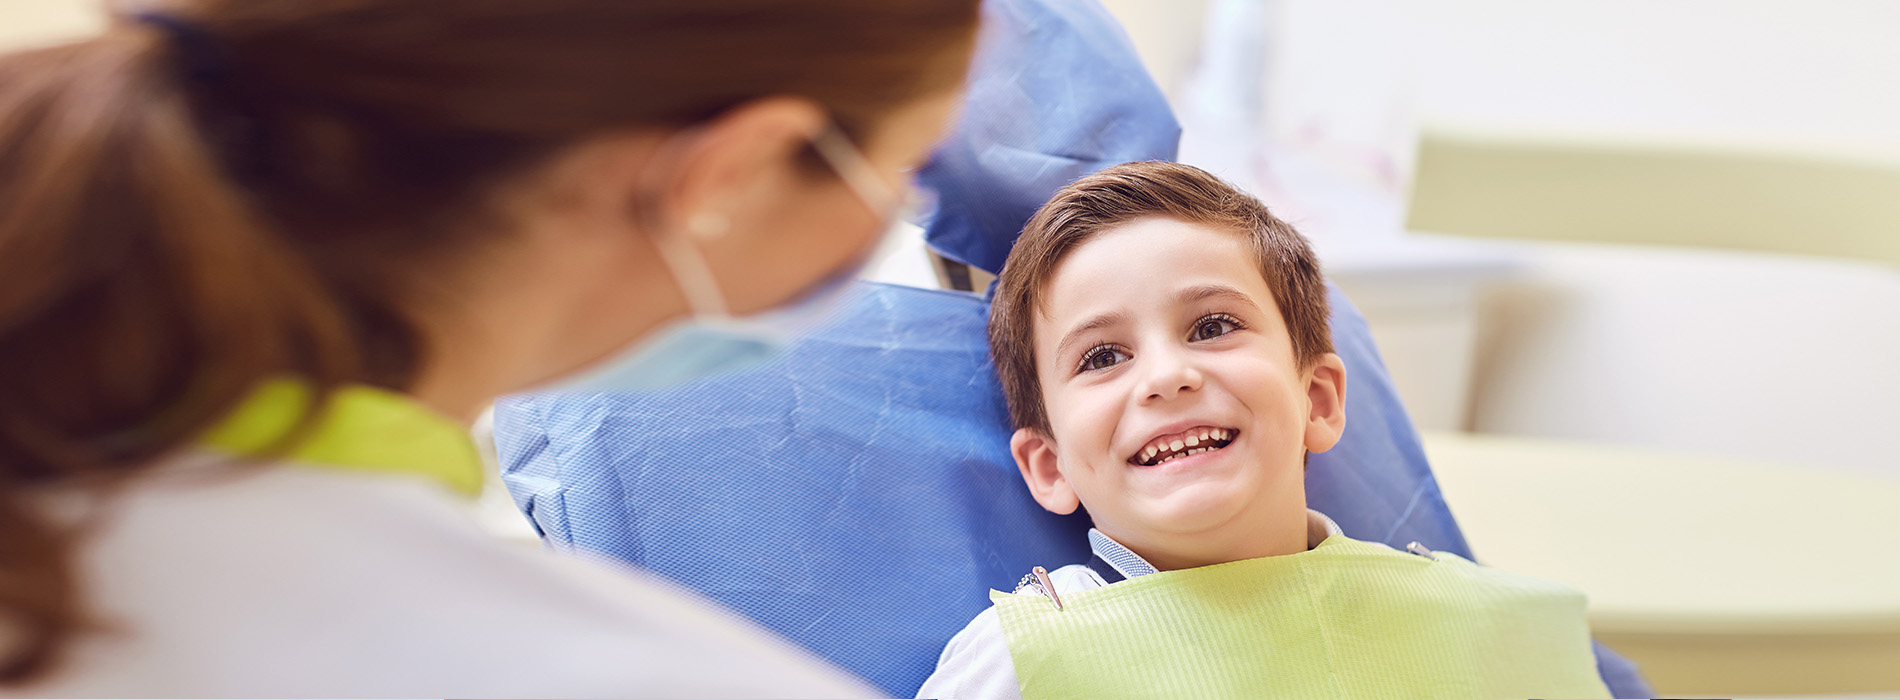 A young boy sitting in a dentist s chair, smiling and looking at the camera, while a dental professional attends to him.